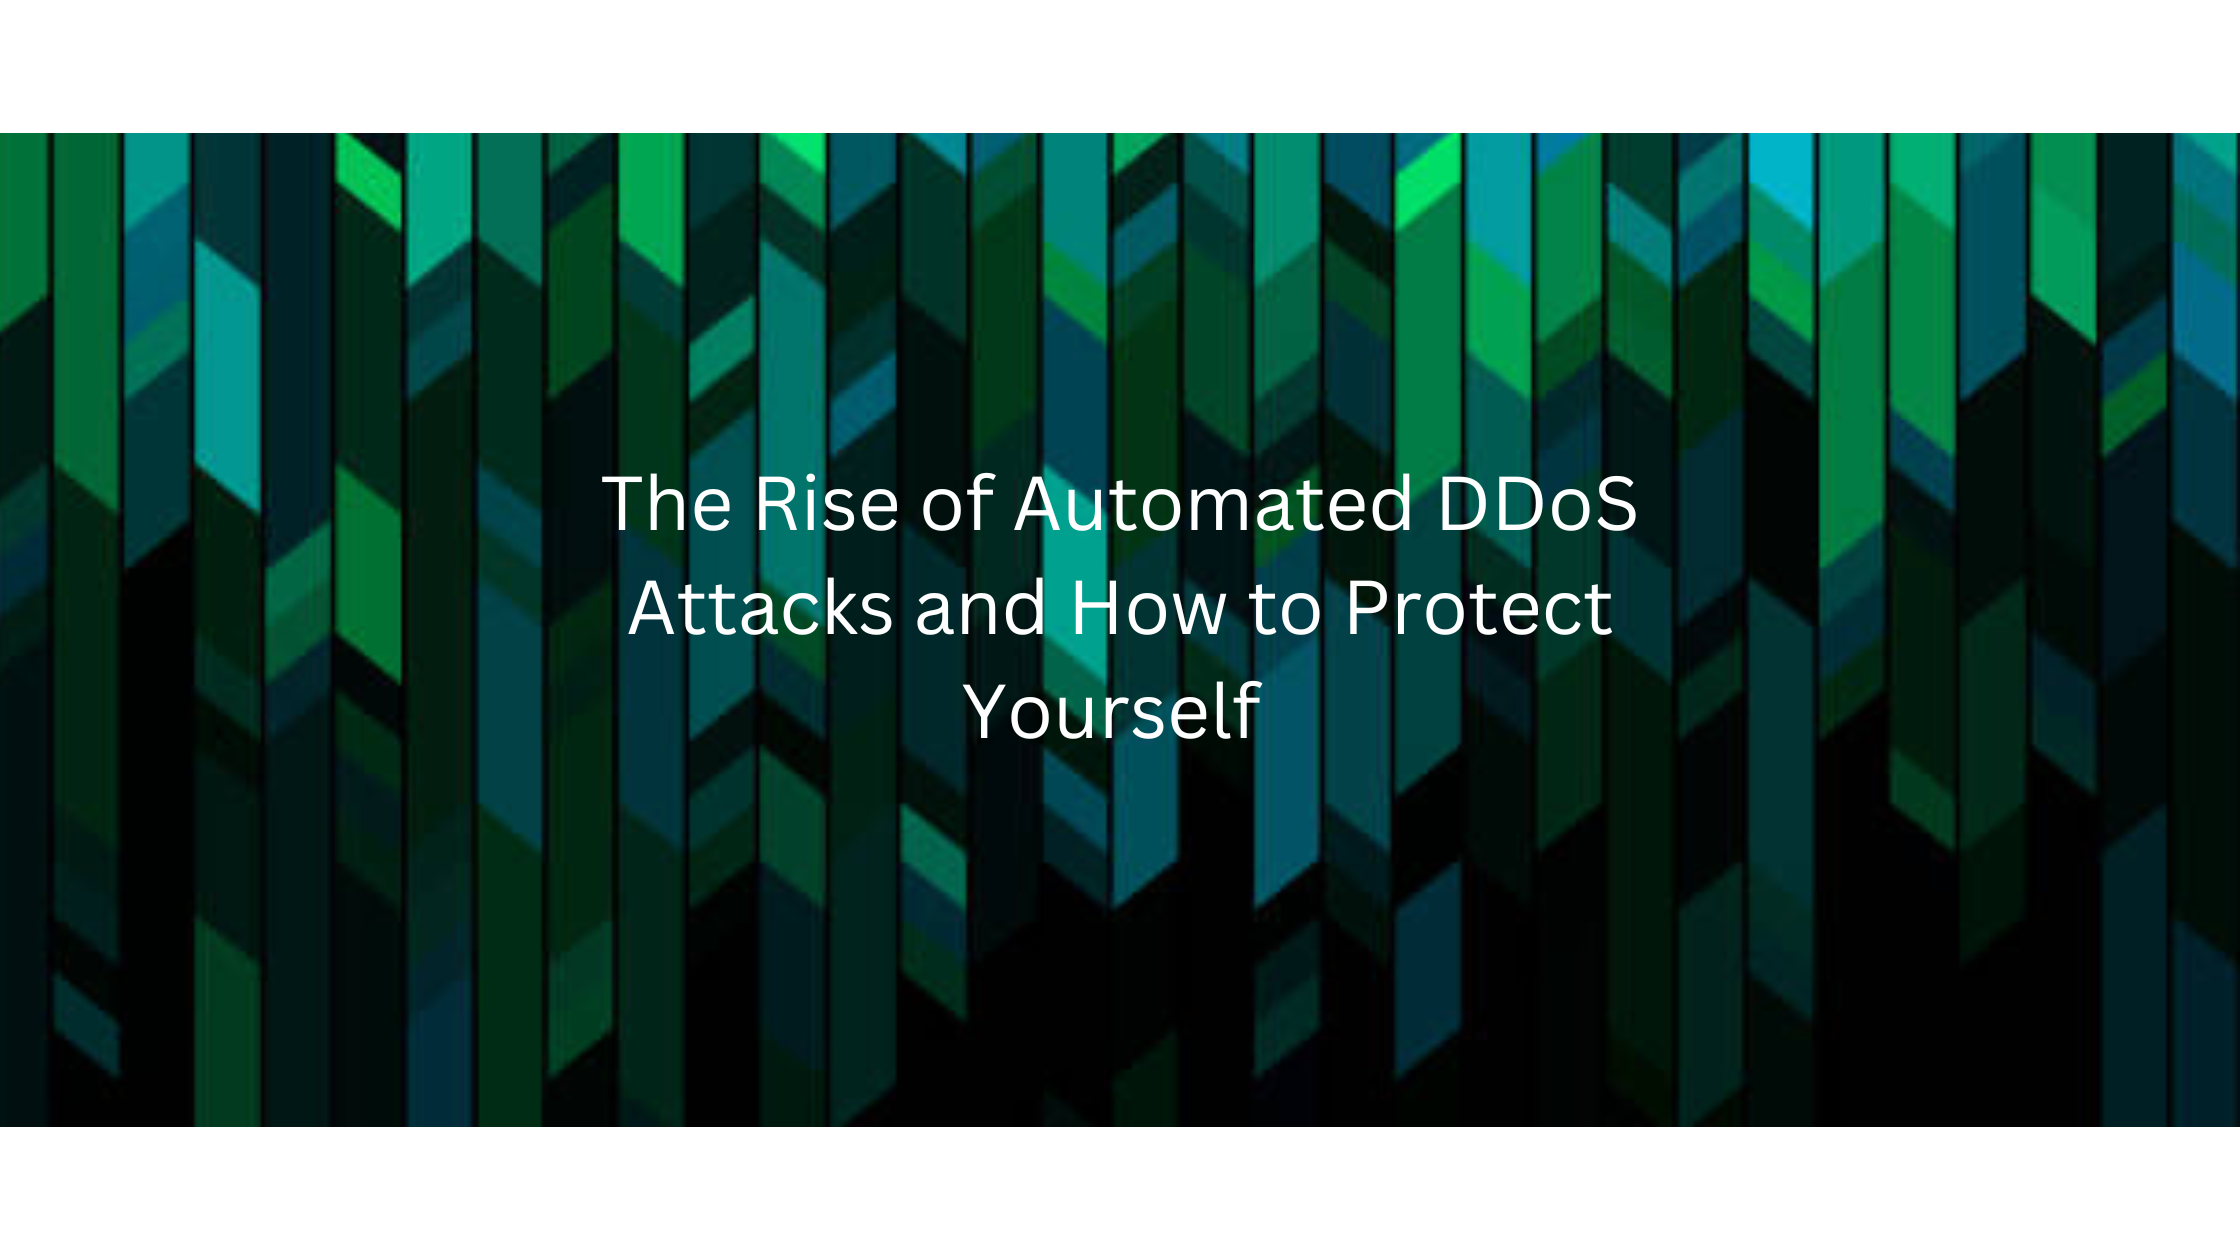 The Rise of Automated DDoS Attacks and How to Protect Yourself